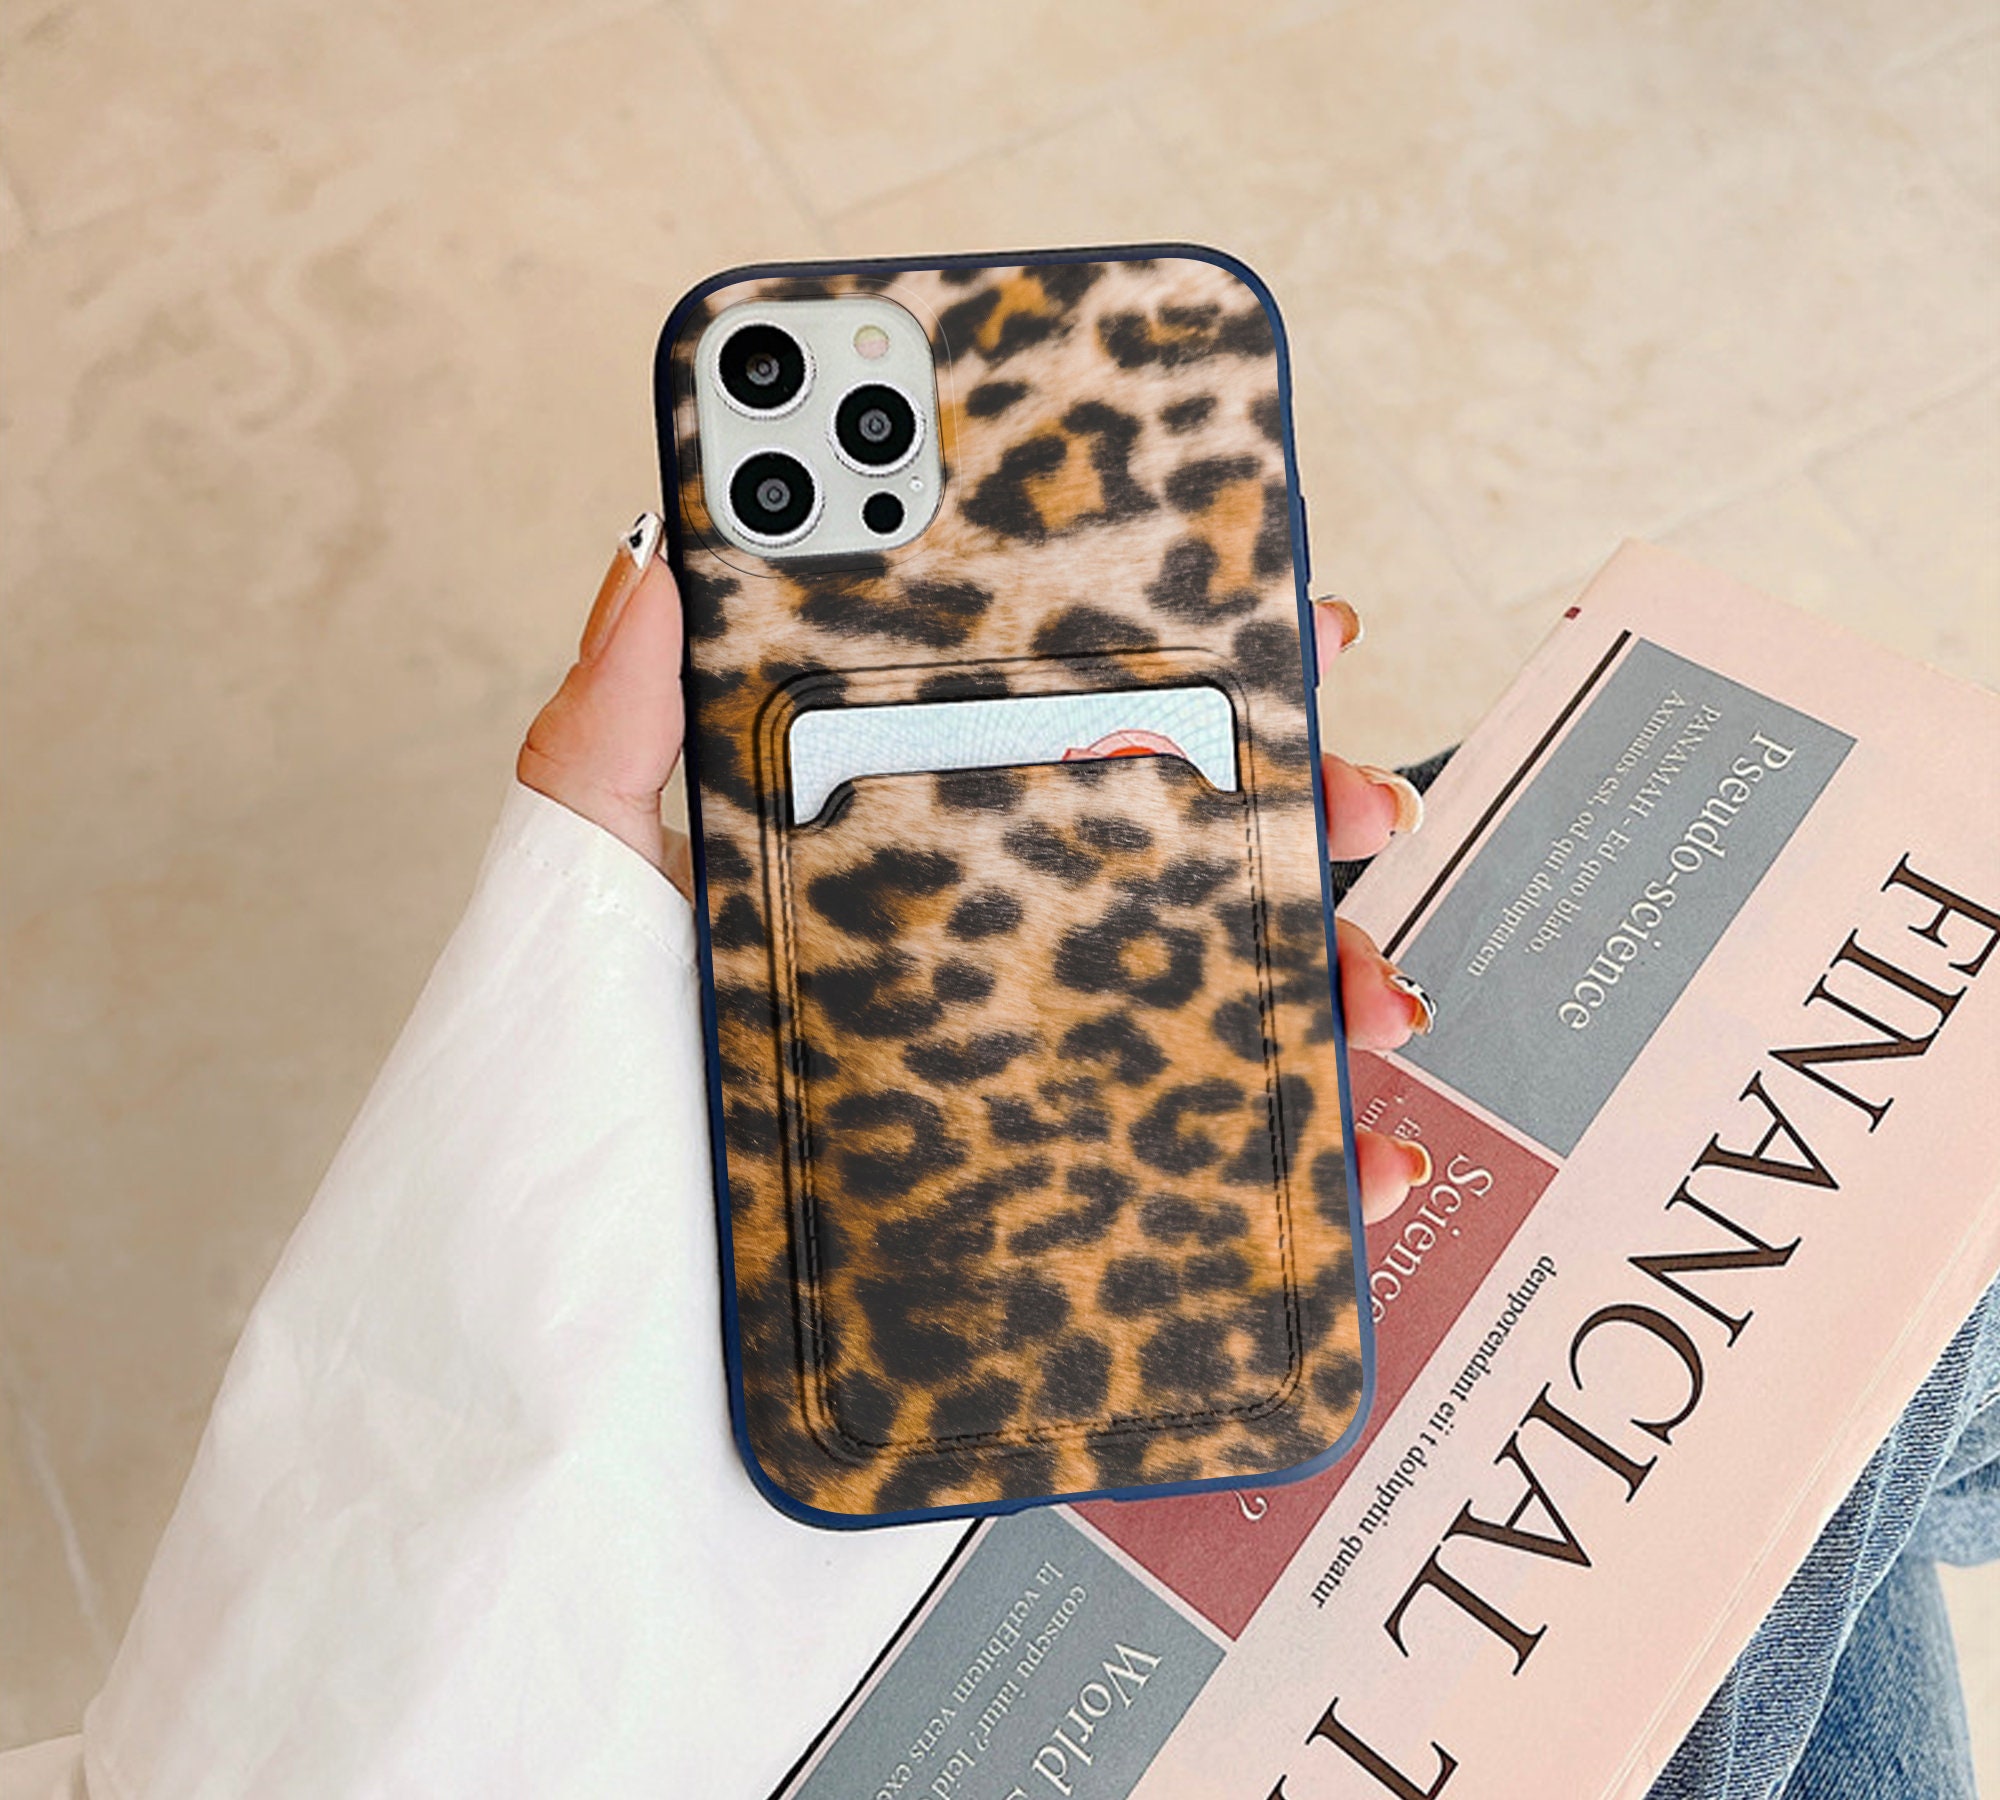  Leopard African Animal 15 FLIP Wallet Phone CASE Cover